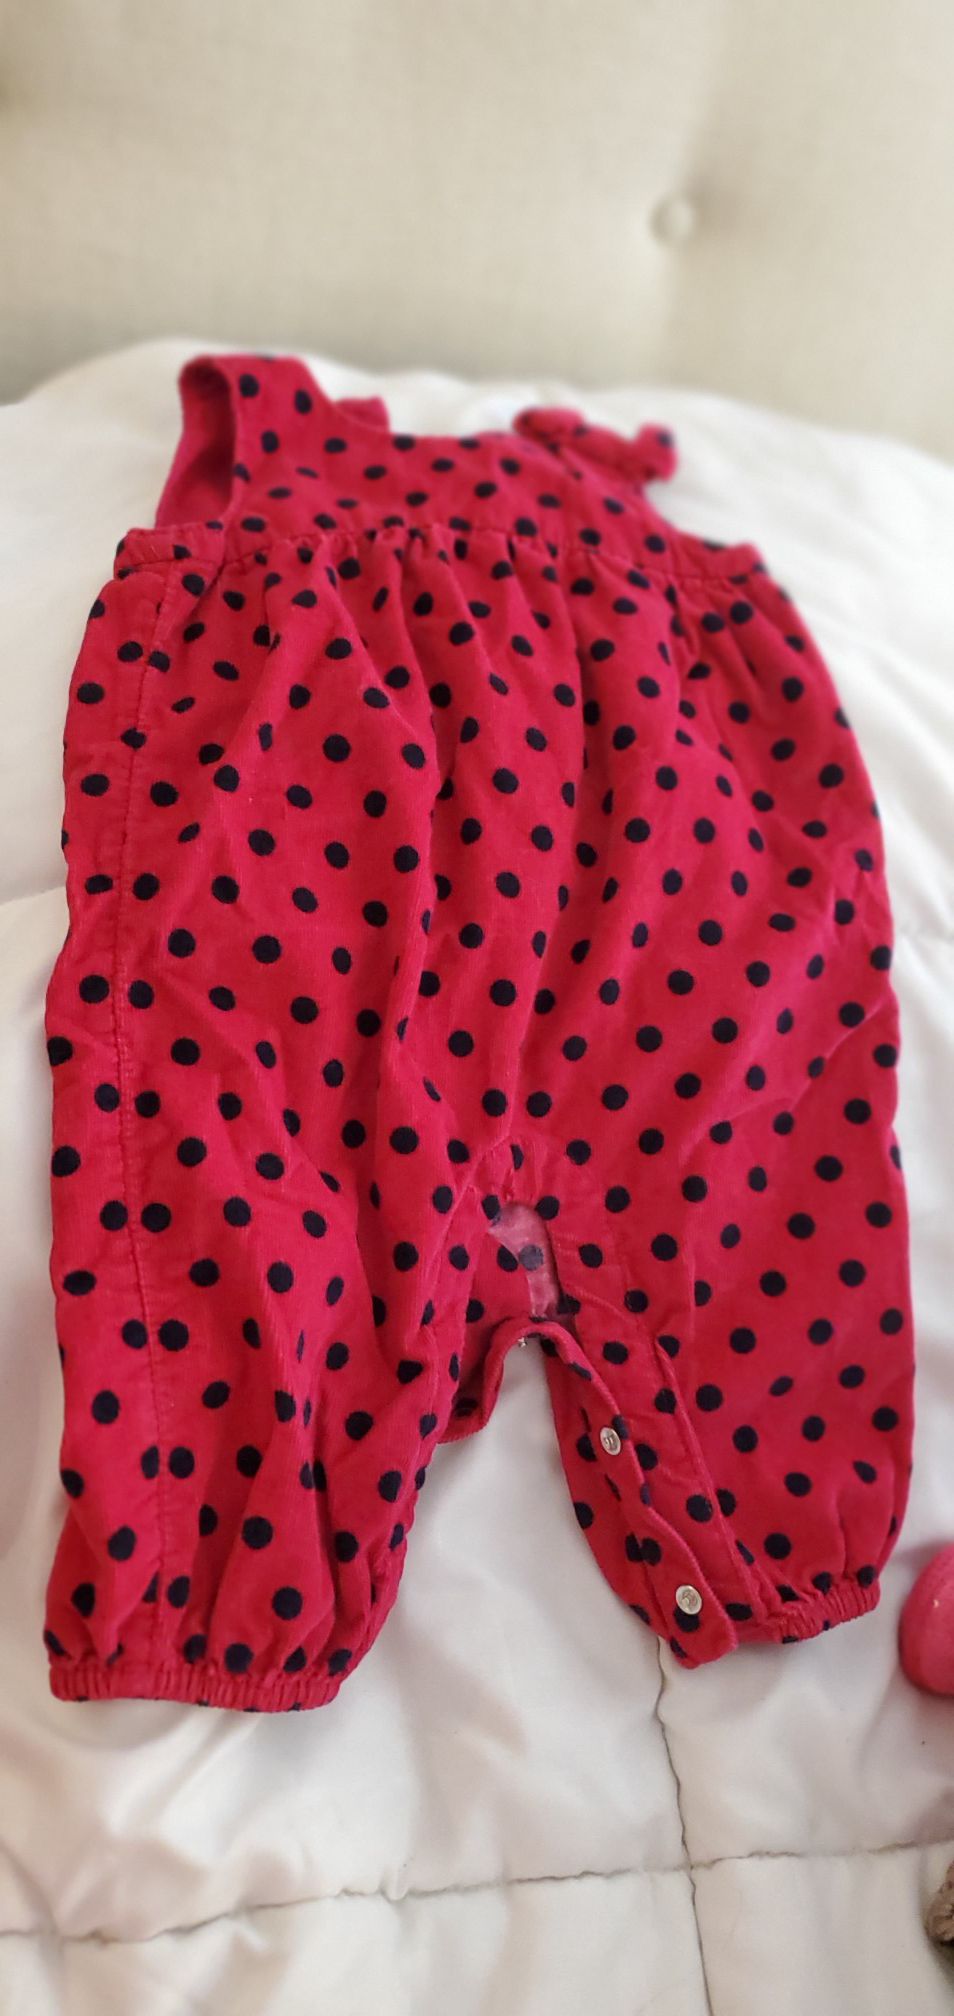 Baby girl red polkadots outfit!❣